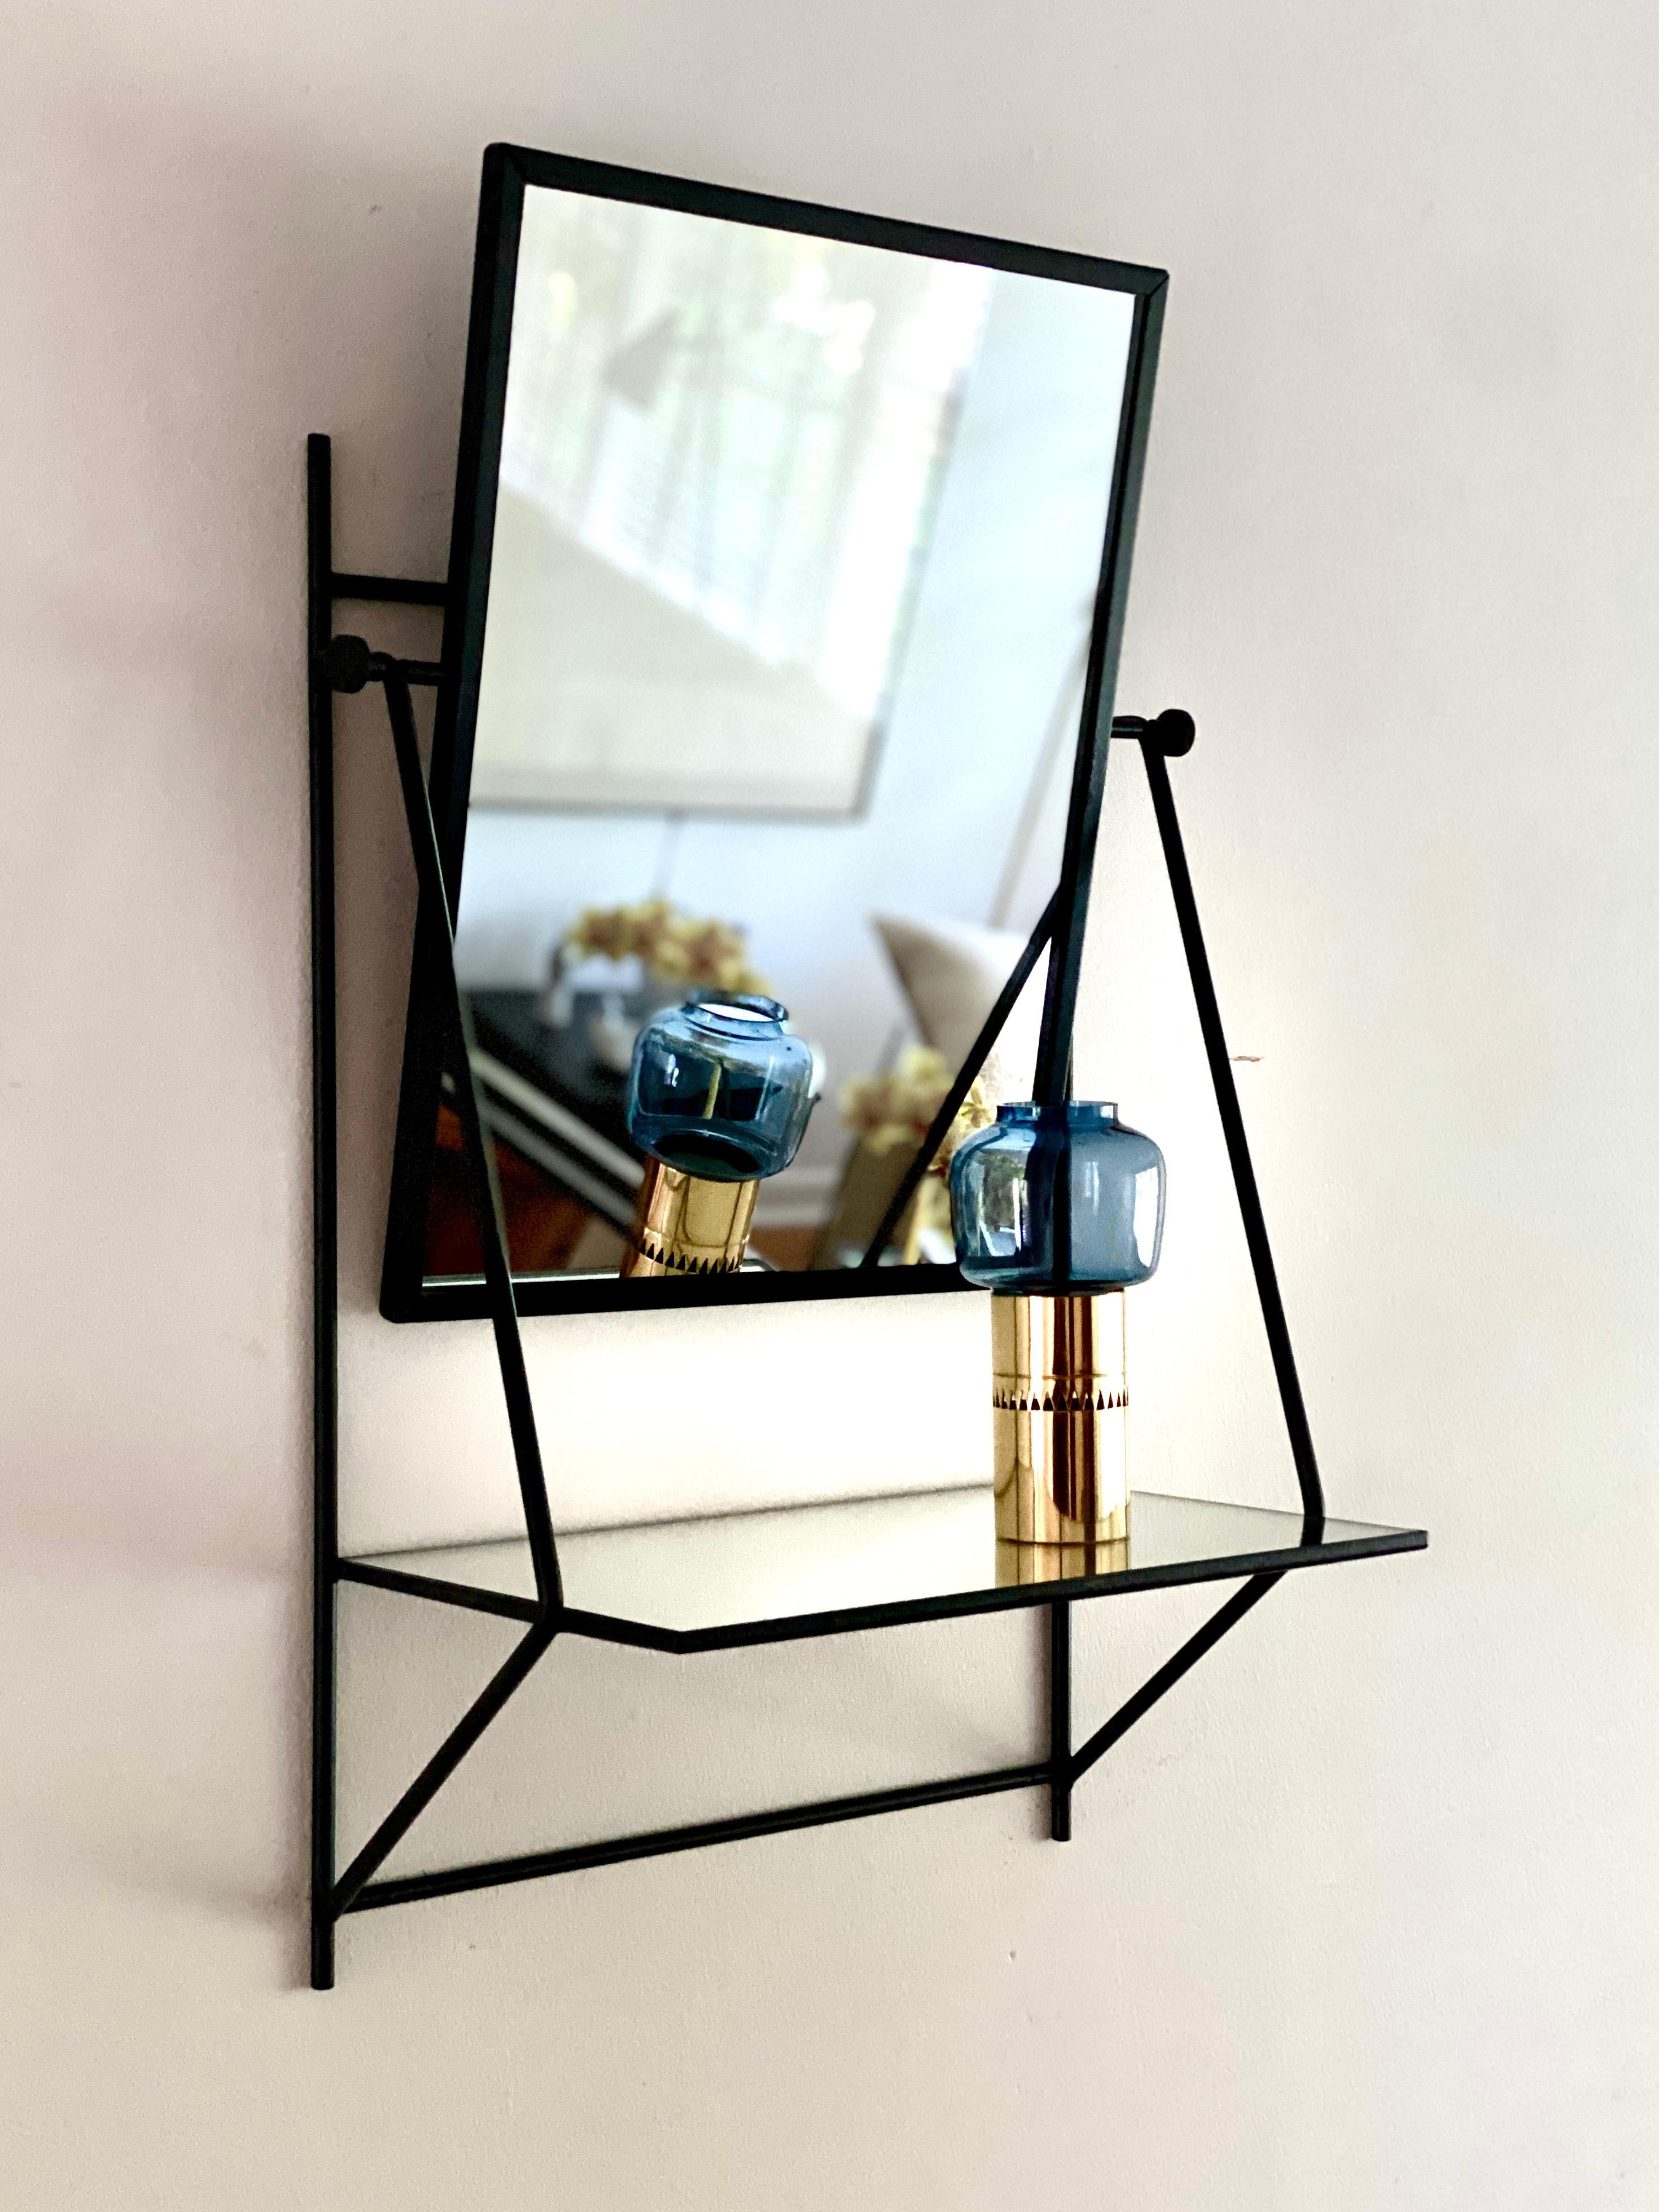 A wall hung mirror / shelf designed by Paul McCobb for Bryce Originals in 1953.  Paul McCobbs designs for Bryce Originals are quite hard to find, this wall hung mirror / shelf design is one of the rarer designs for Bryce Originals.  The piece is